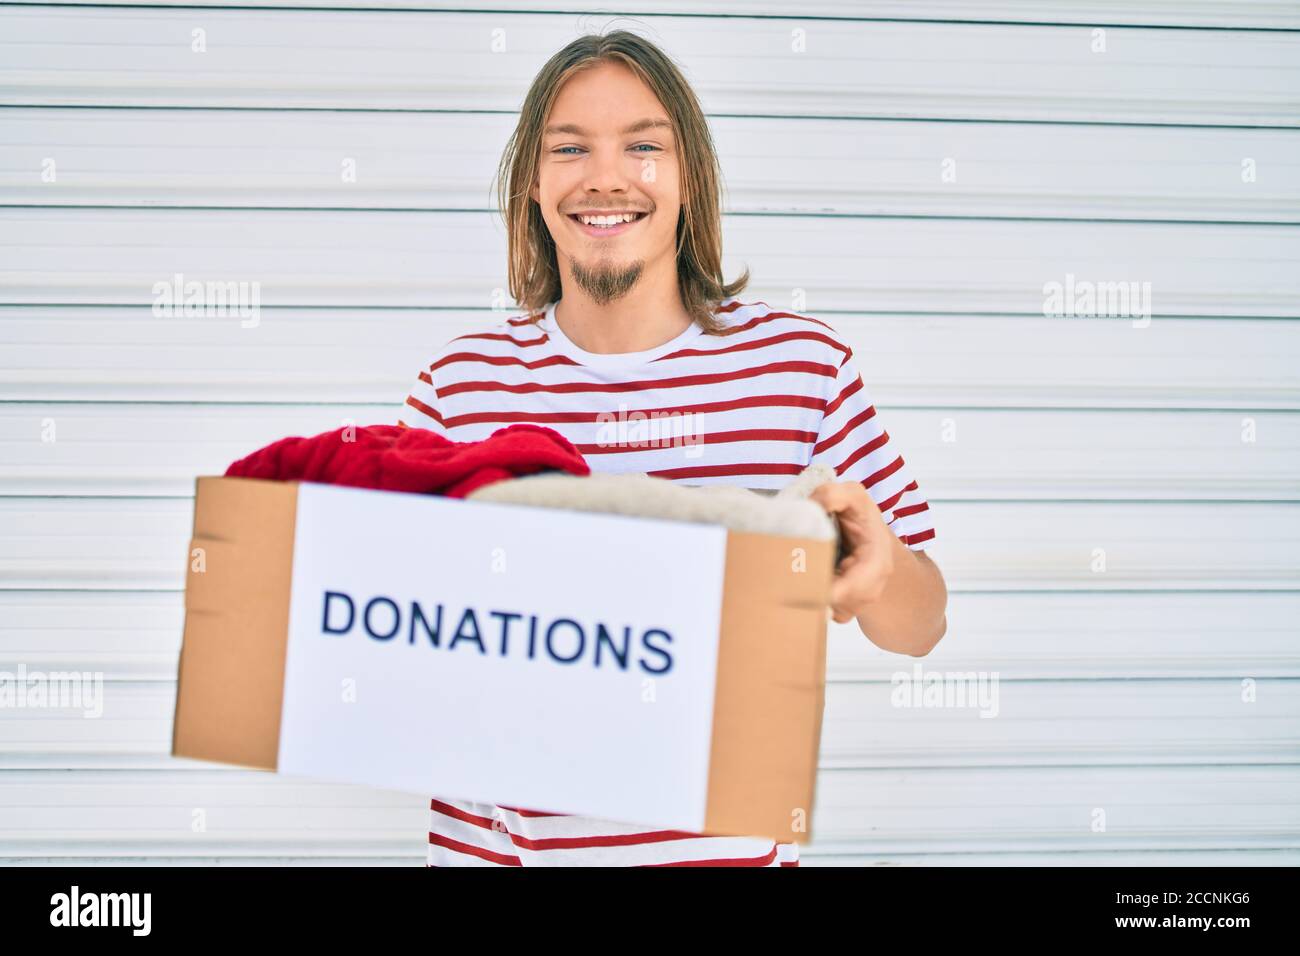 https://c8.alamy.com/comp/2CCNKG6/young-caucasian-man-with-blond-long-hair-and-beard-holding-cardboard-box-with-clothes-from-donations-2CCNKG6.jpg